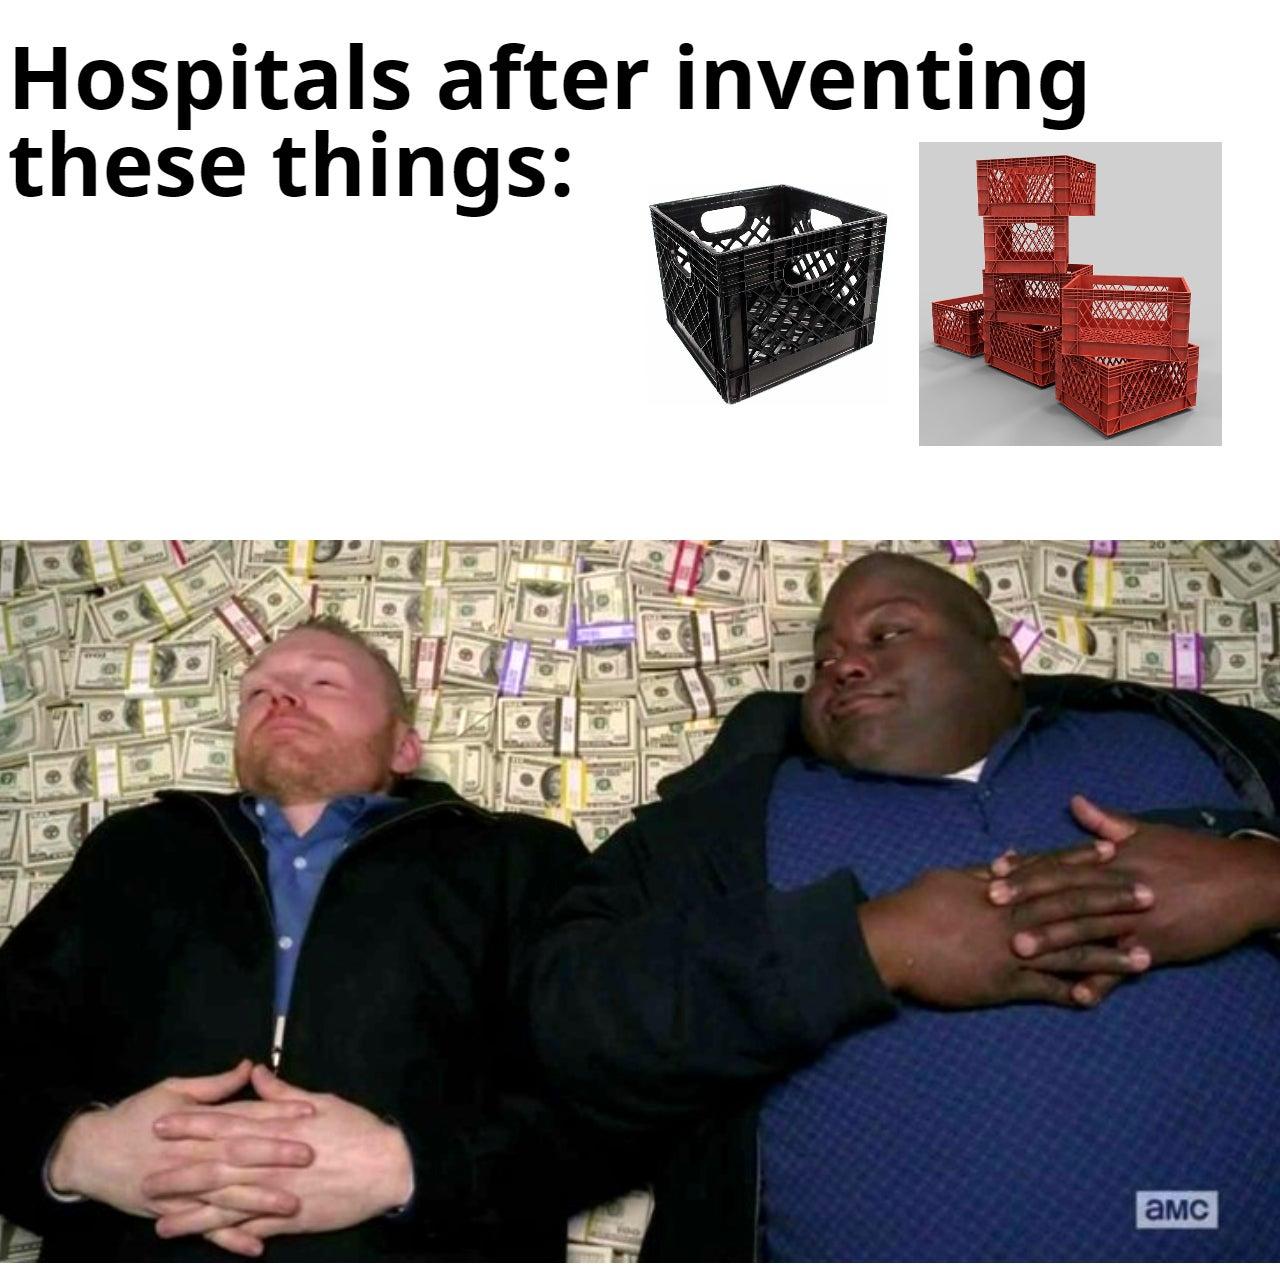 breaking bad cash meme - Hospitals after inventing these things 11